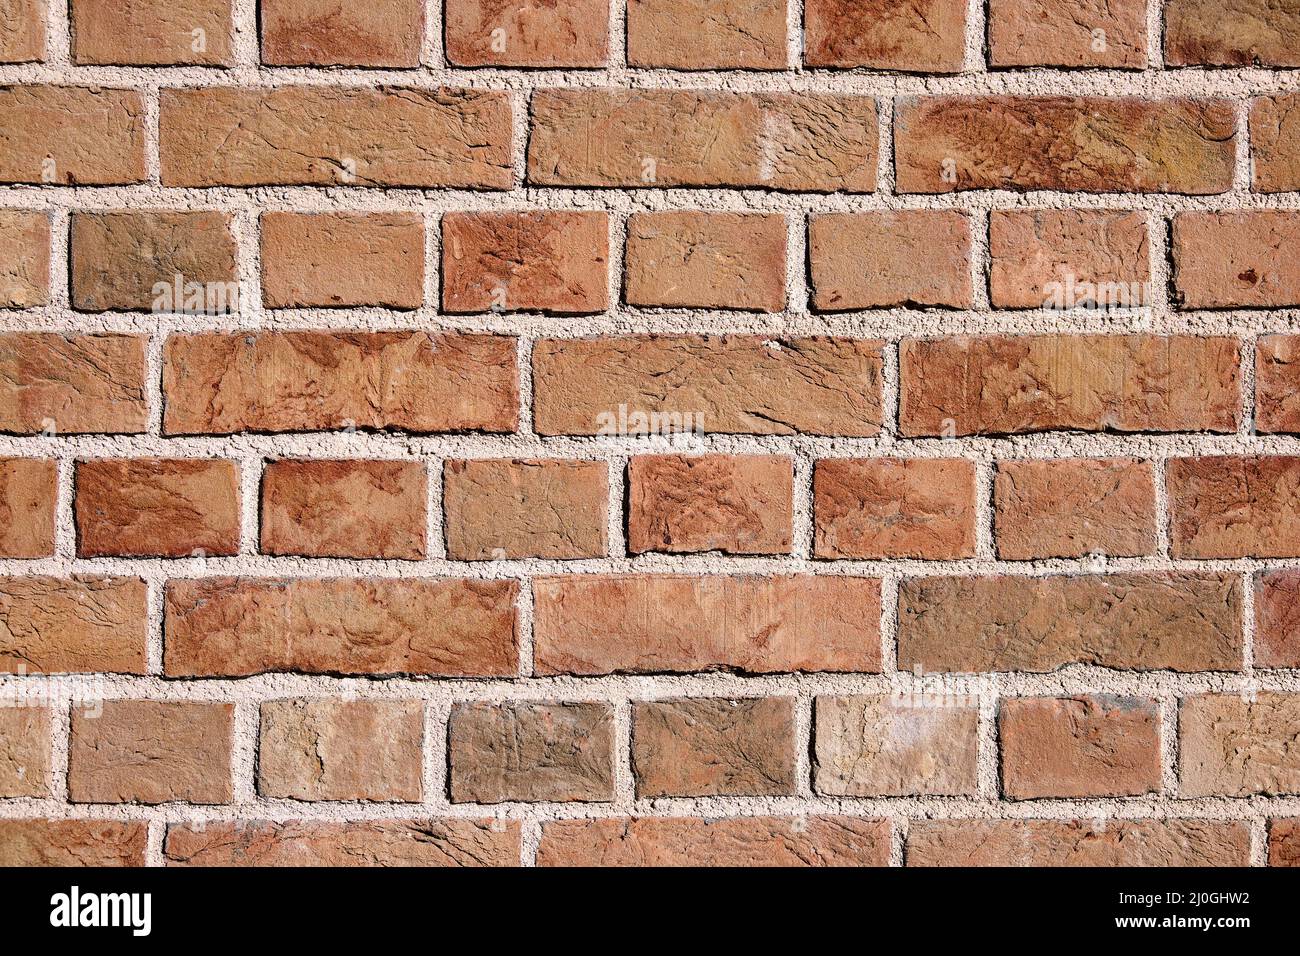 Background from a clean orange brick wall Stock Photo